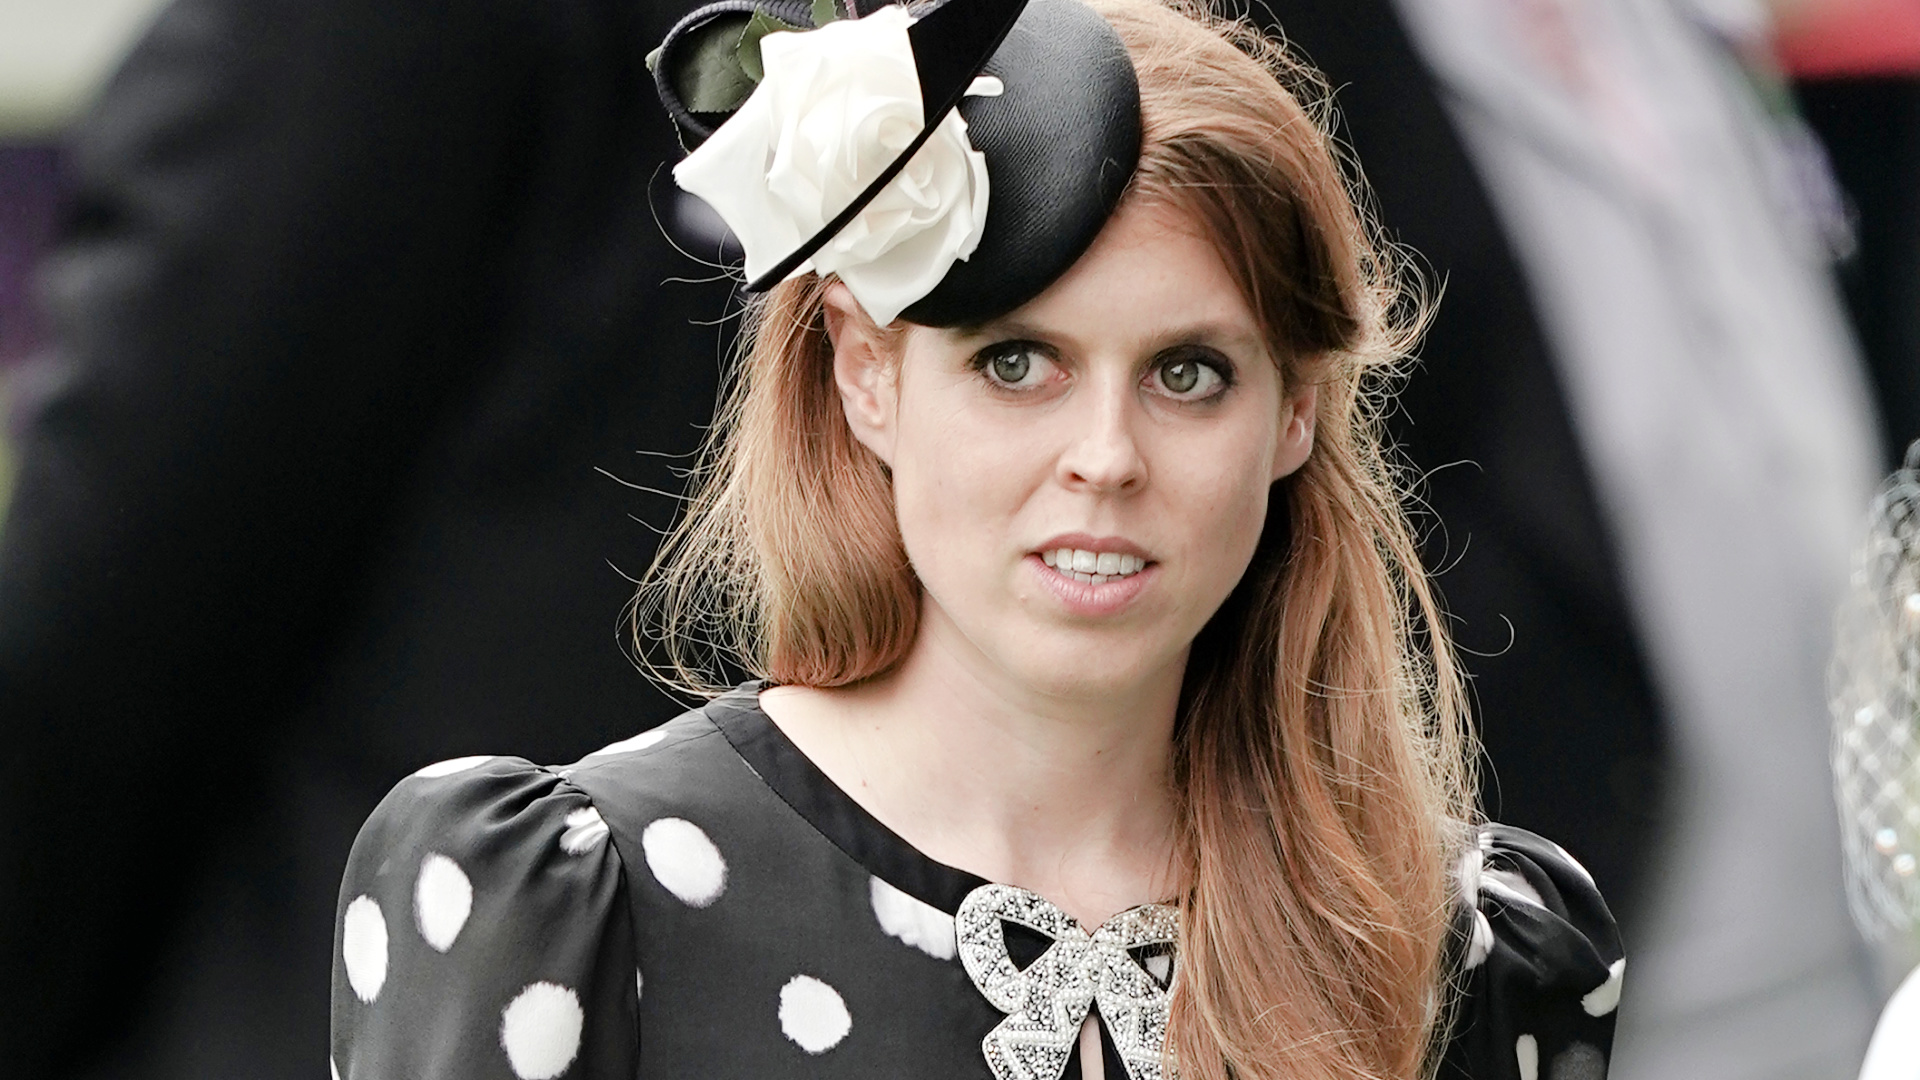 Beatrice At Royal Ascot Her Pretzel Hat And Other Looks Of The Princess Of Style Over The Years 0466